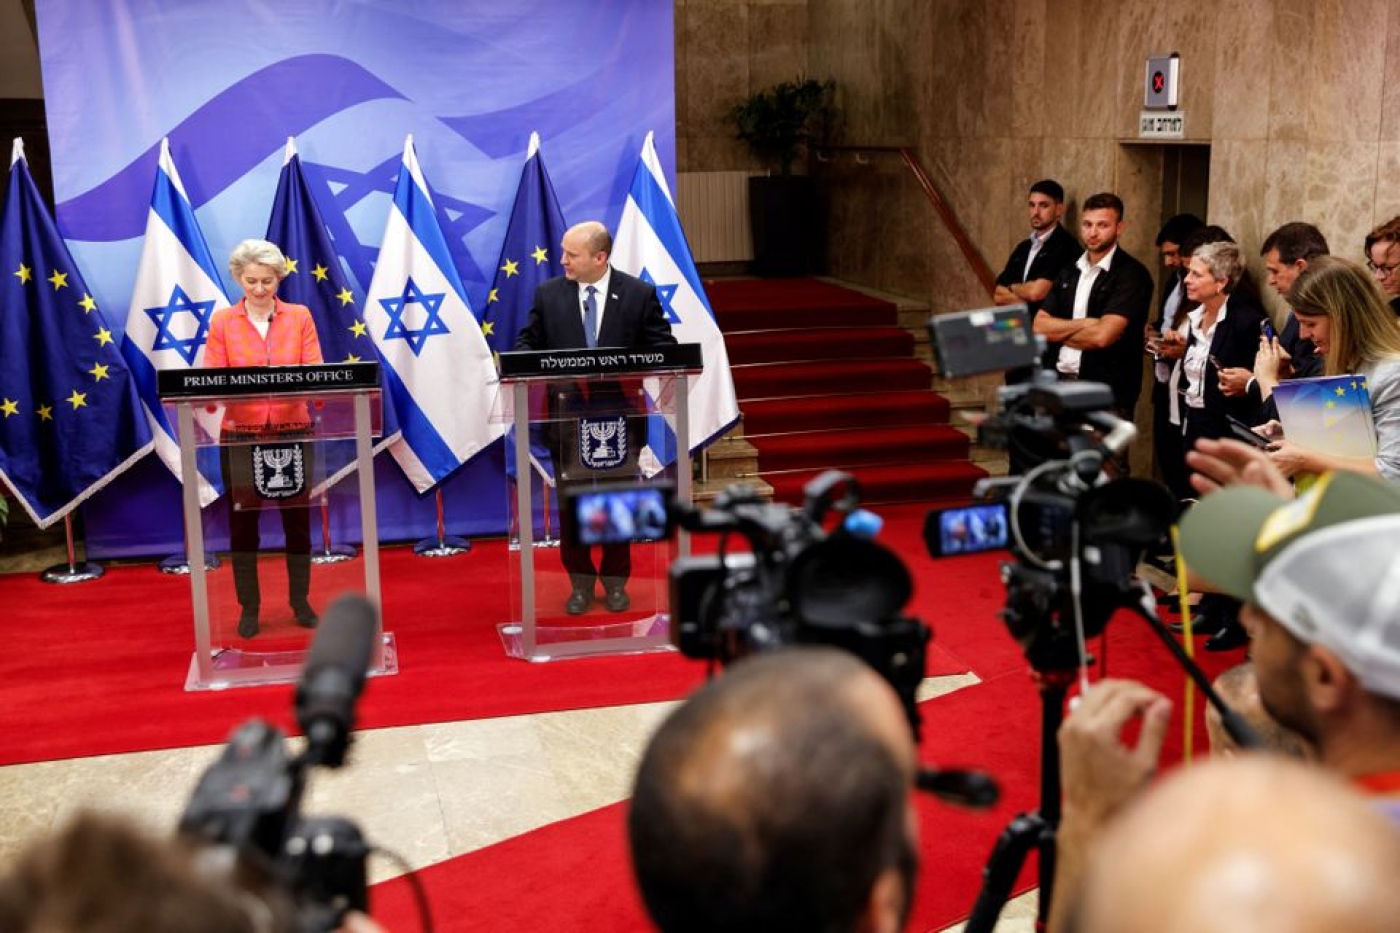 Israeli Prime Minister Naftali Bennett and European Commission President Ursula Von Der Leyen forged a close energy relationship when they met in Israel in June (Reuters)